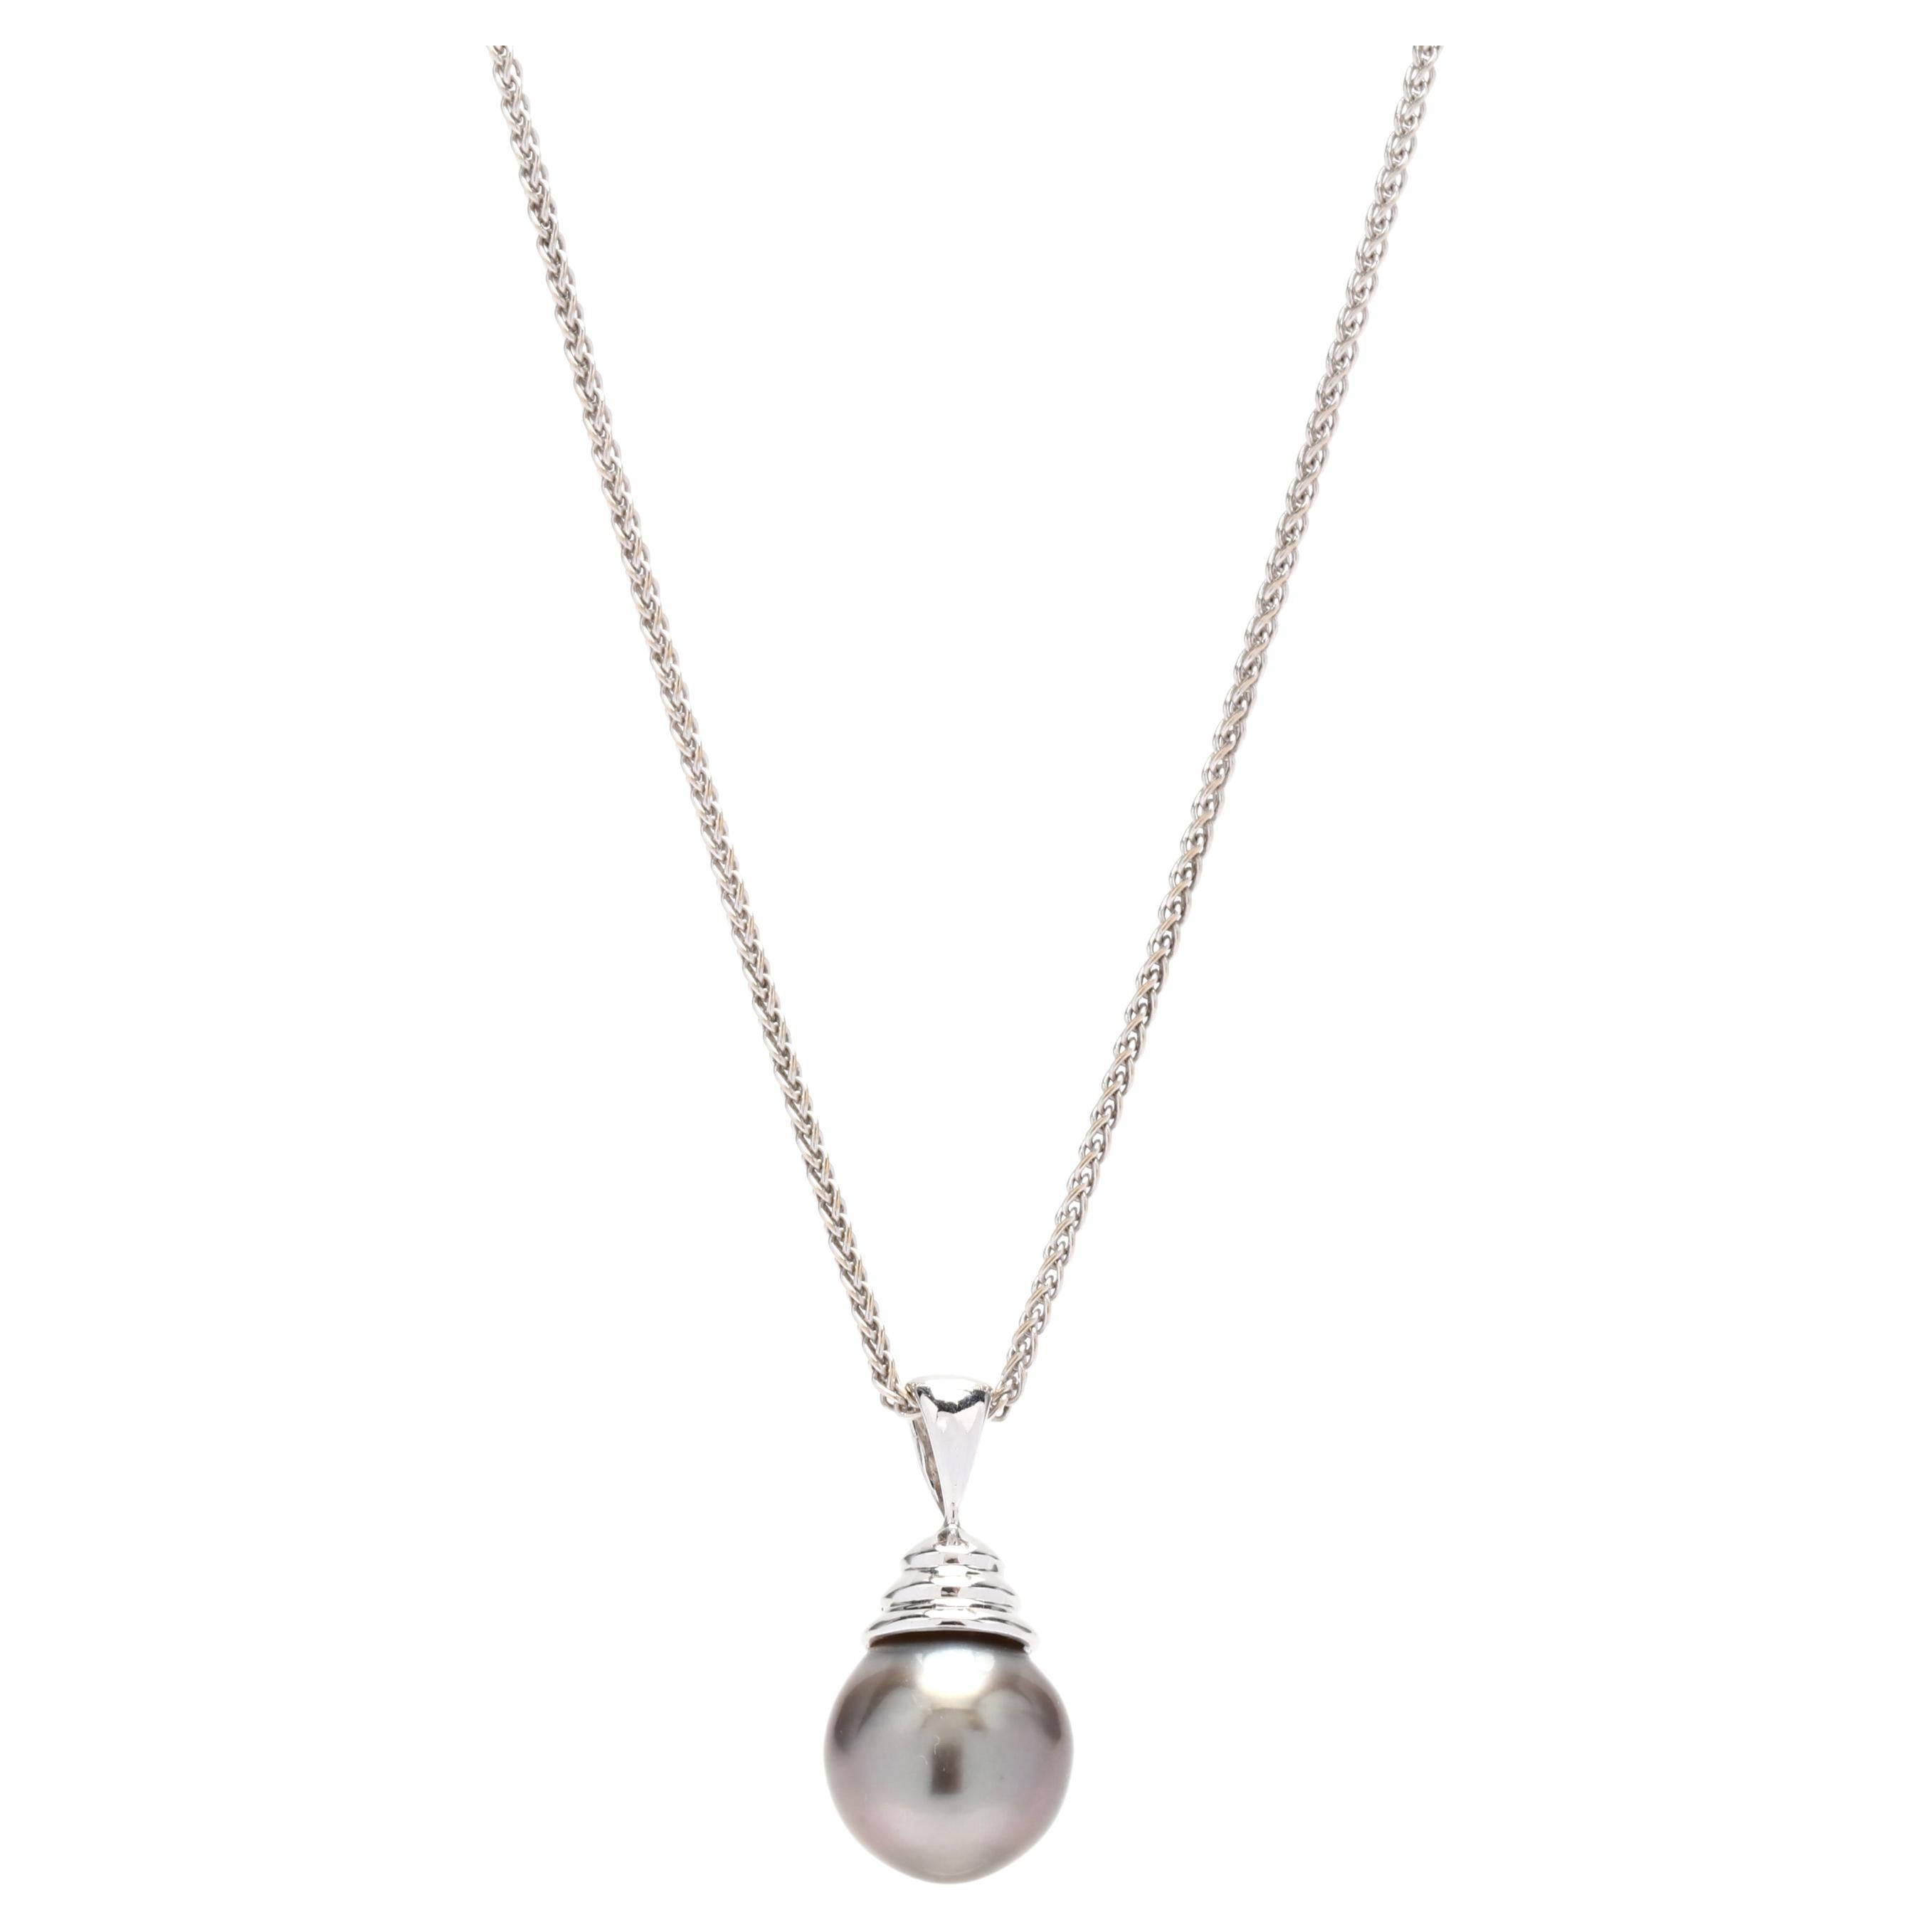 Tahitian Pearl Pendant Necklace, 18K White Gold, Length 18 Inch, Simple Pearl